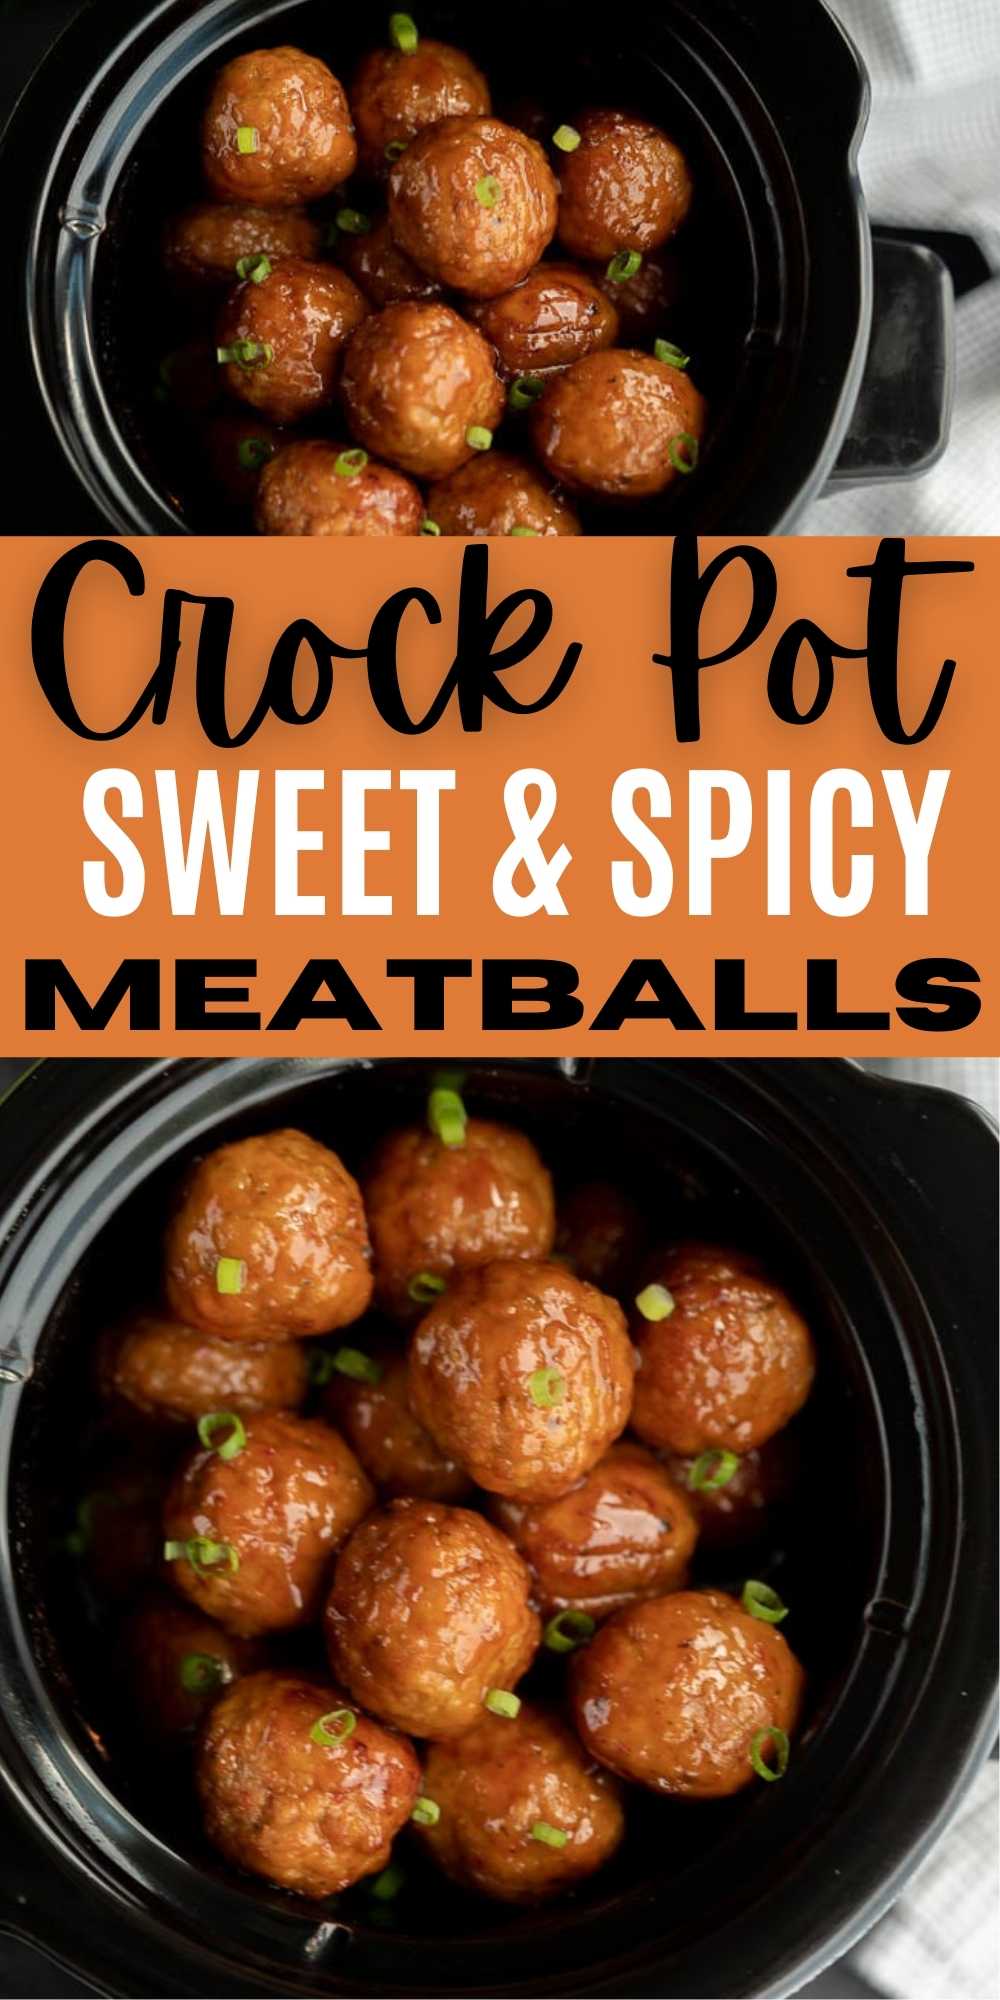 You are going to love this easy Crockpot Sweet and Spicy Meatballs Recipe. Only 4 ingredients are needed and its the perfect appetizer or dinner for your family.  This slow cooker recipe with frozen meatballs is super simple to make and packed with flavor too.  #eatingonadime #crockpotrecipes #slowcookerrecipes #meatballrecipes #asianrecipes 
